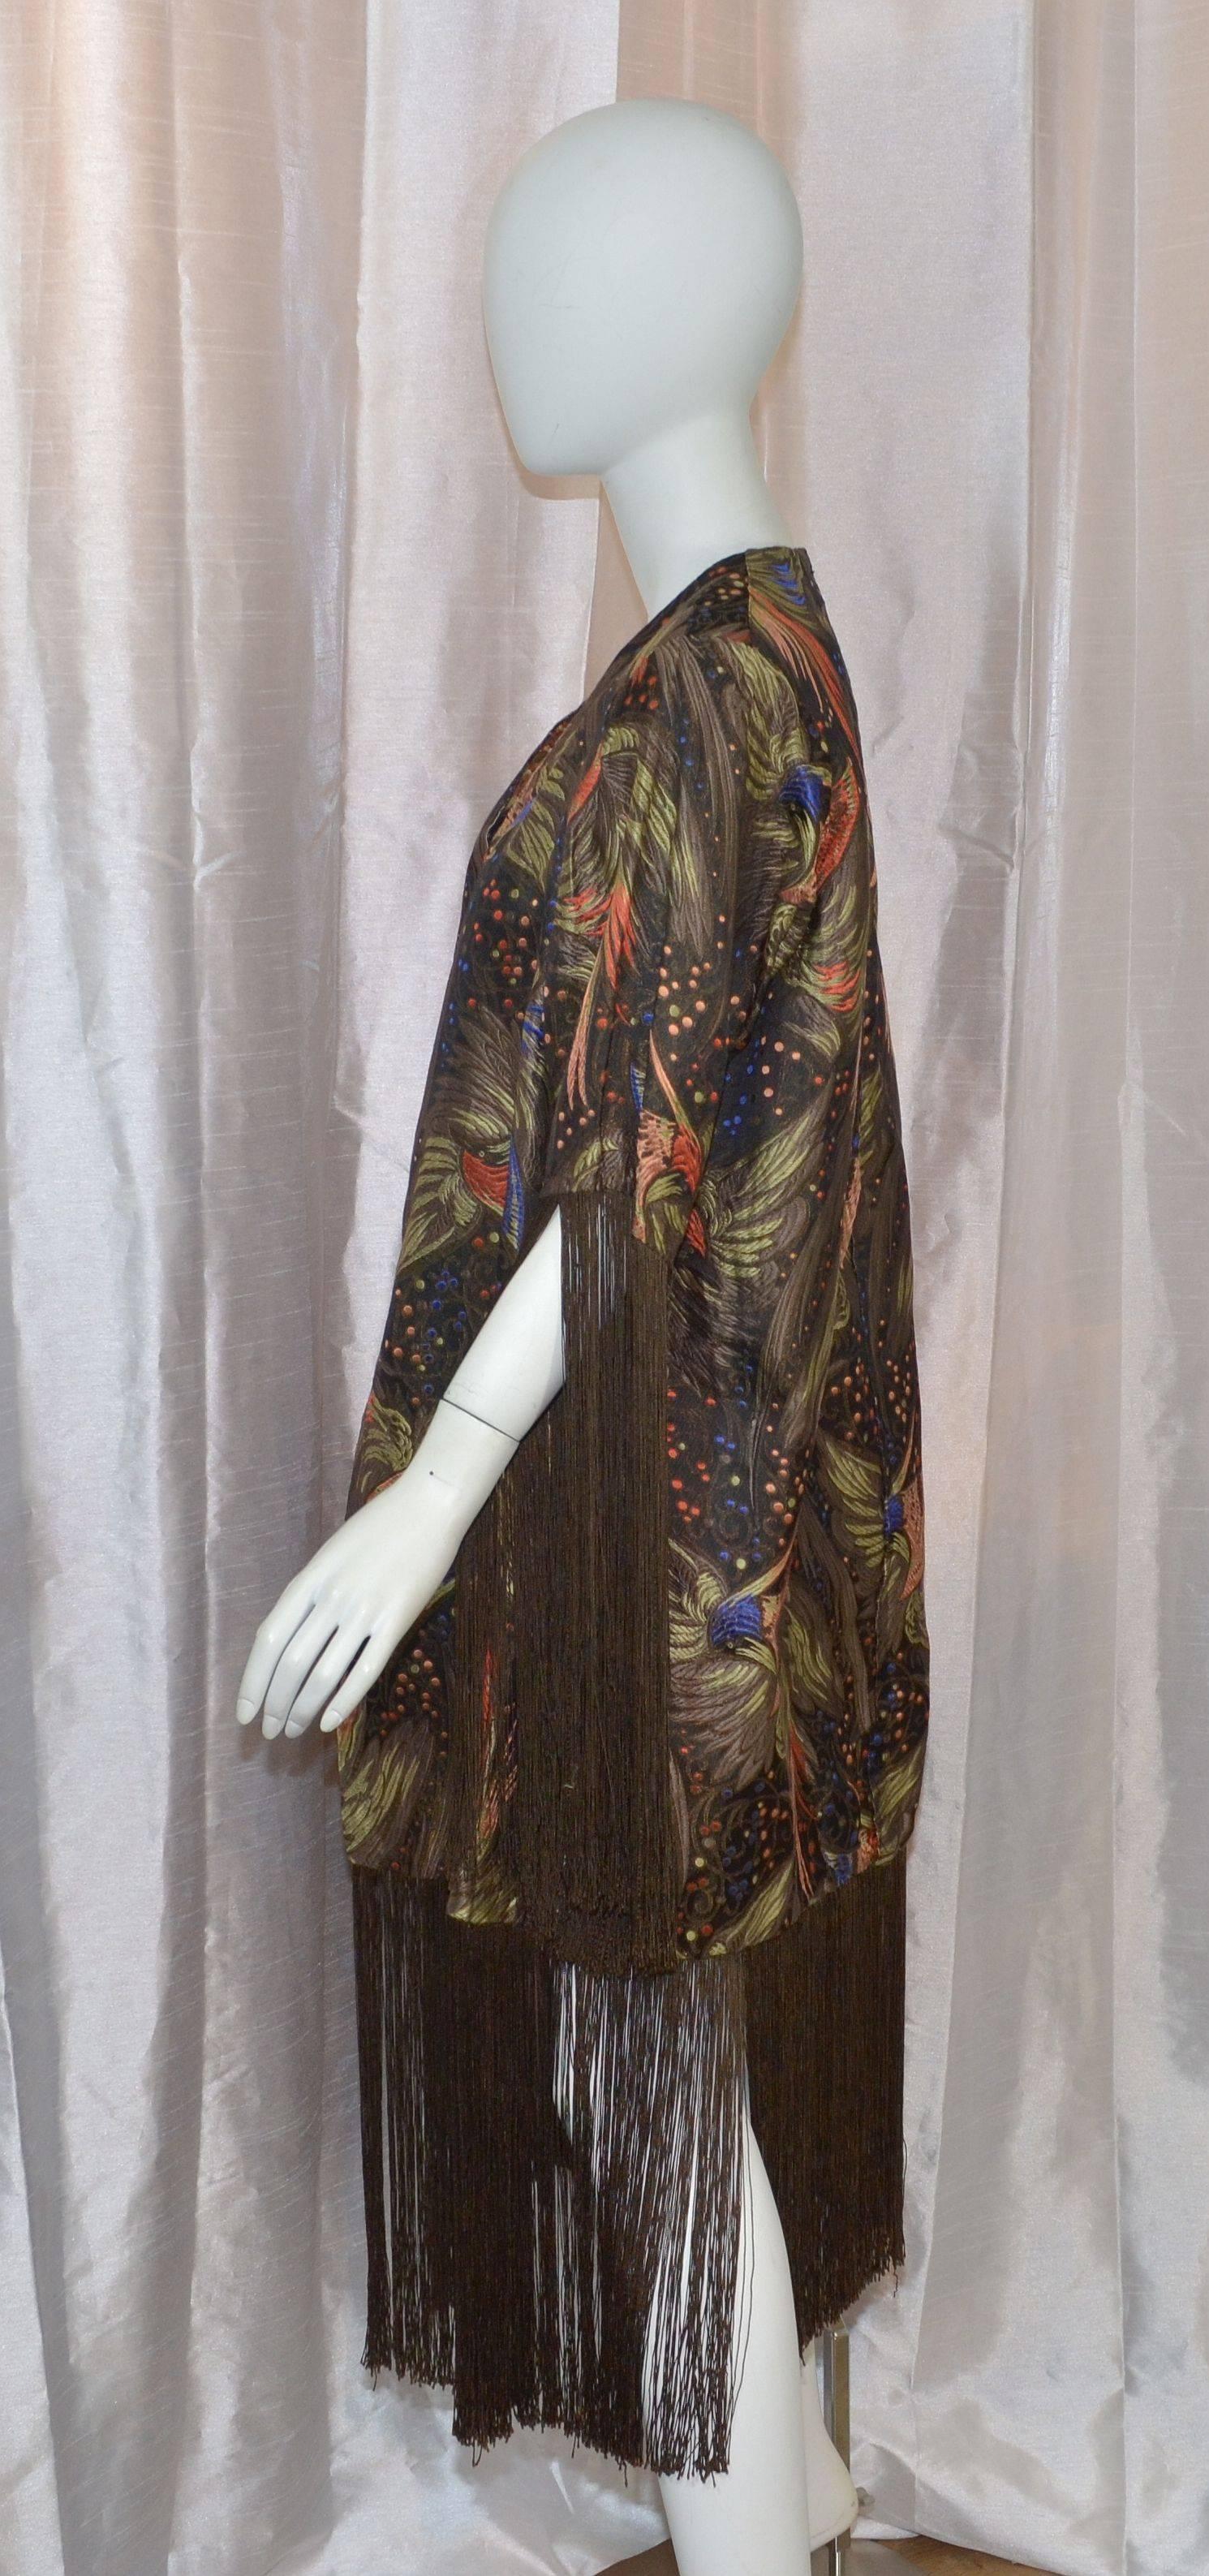 1920s jacket features beautiful multicolored embroidery throughout with fringed trimmings along the sleeves and hem. Jacket has hook-and-eye closures and is fully lined. Very wearable piece.

Measurements are as follows:

Bust - 46''
Sleeves -